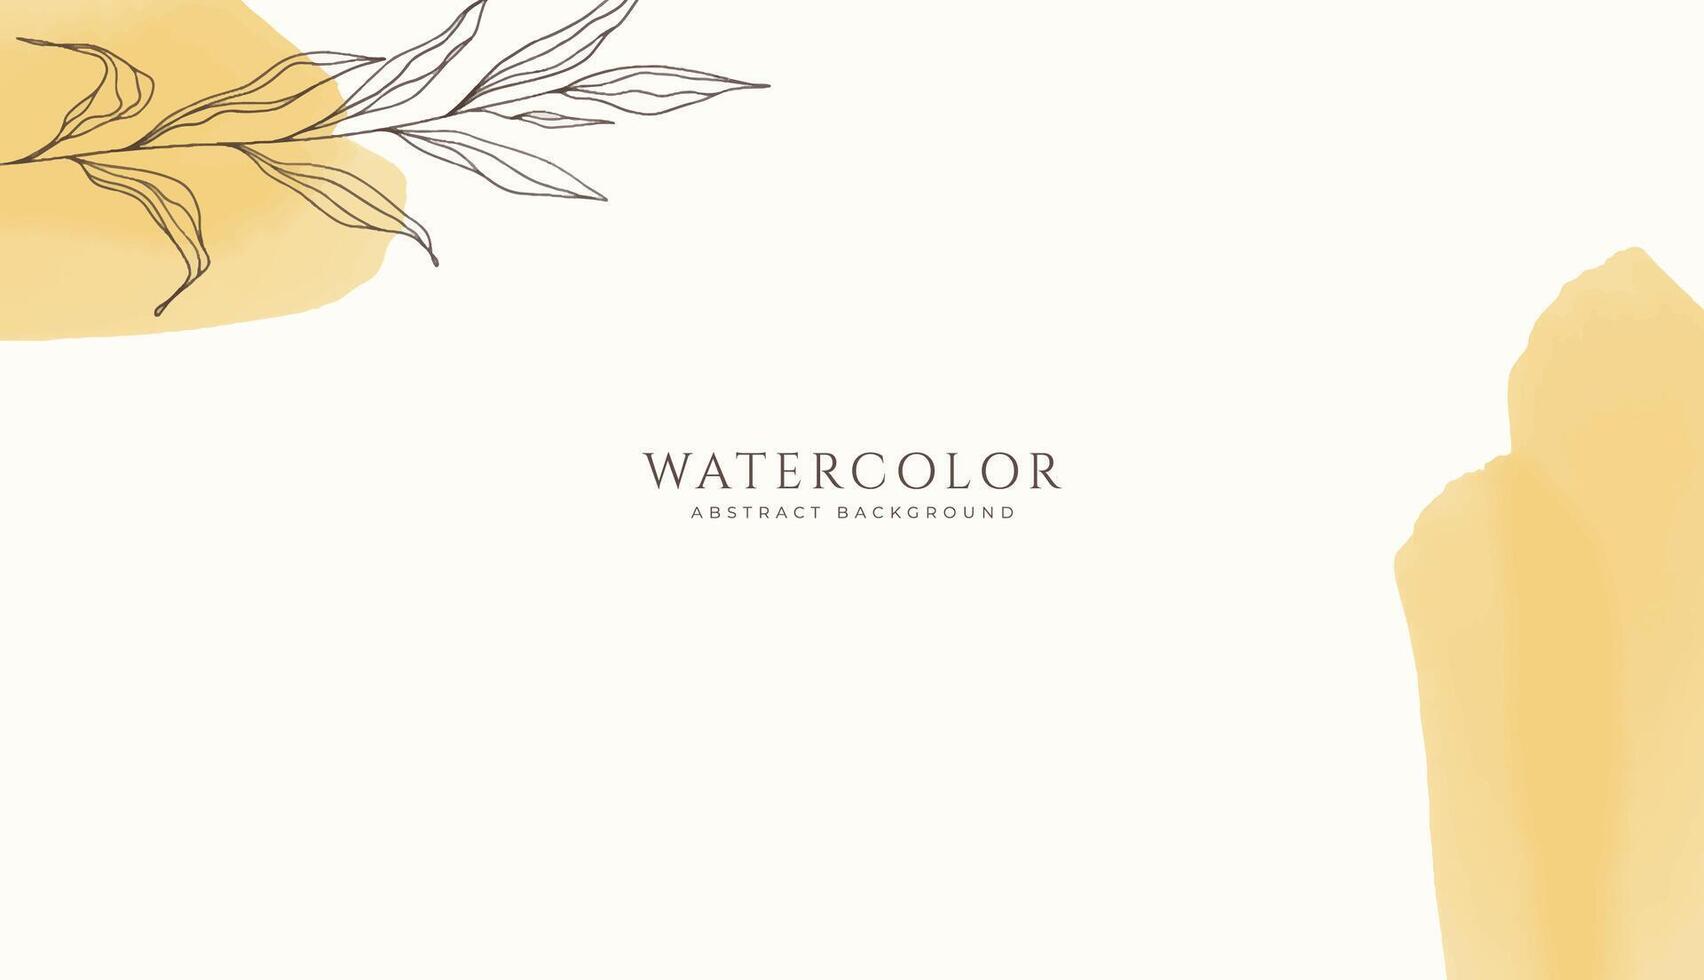 Abstract horizontal watercolor background. Neutral light brown yellow colored empty space background illustration vector